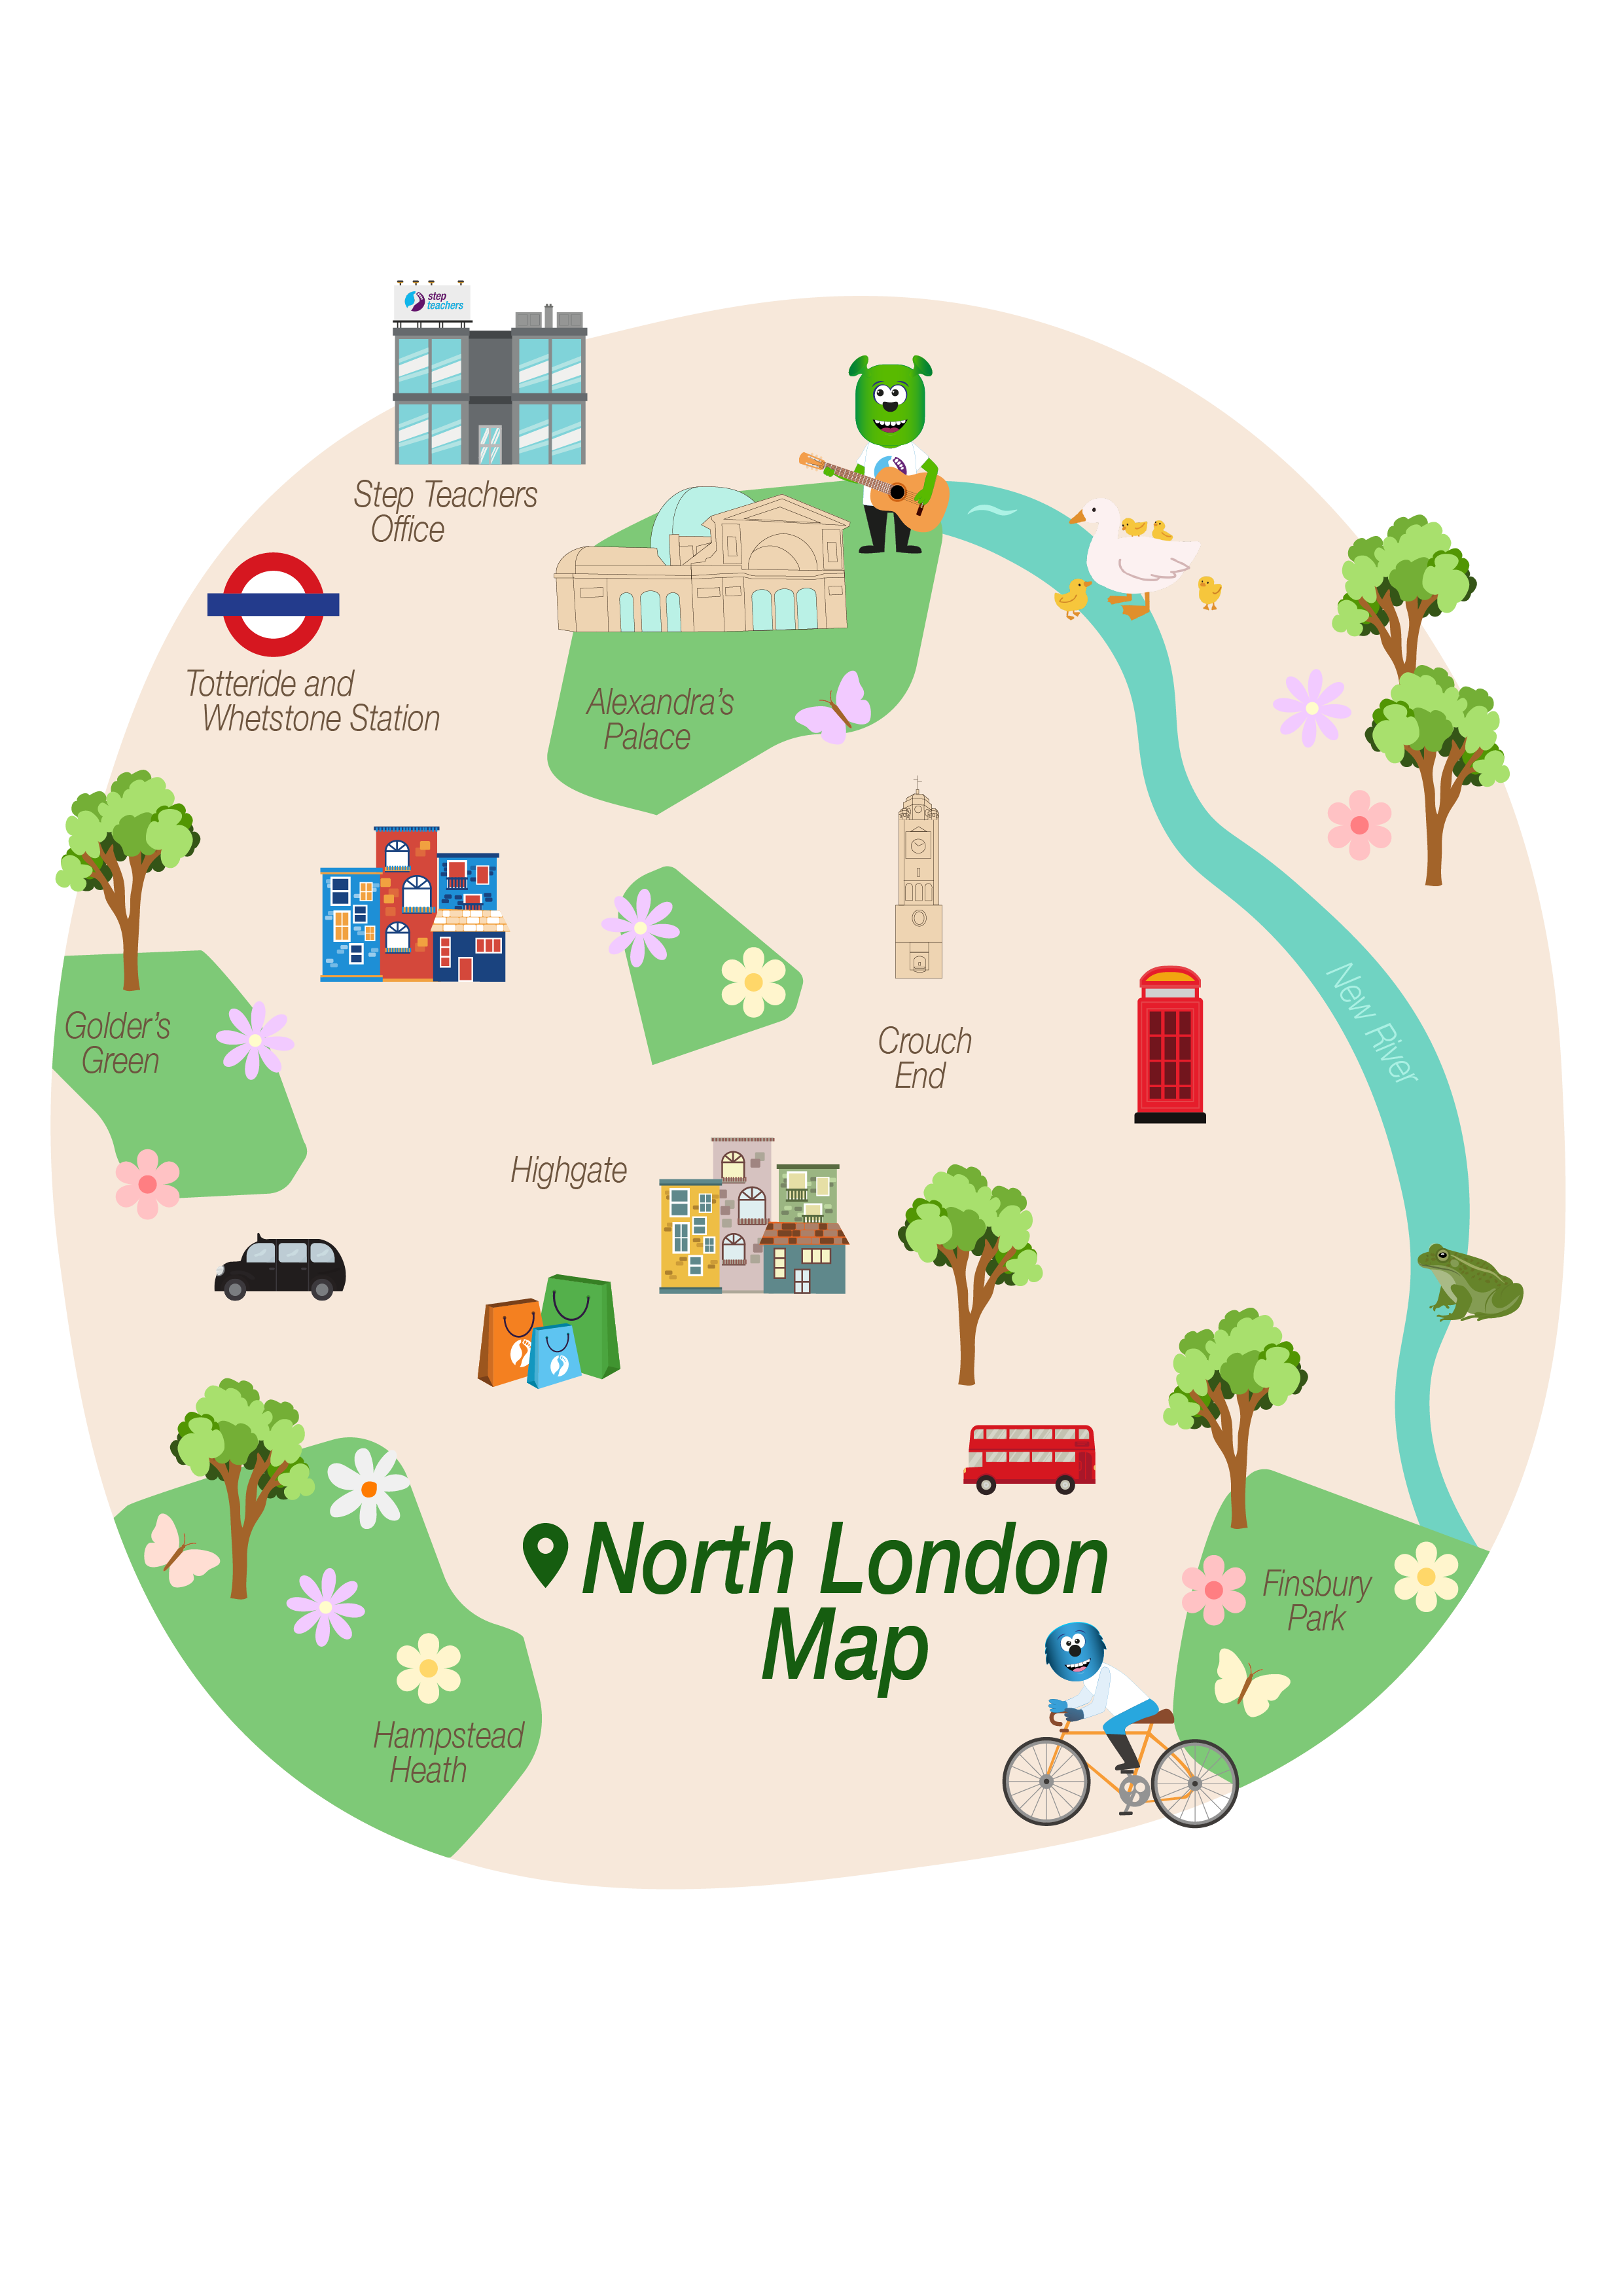 Go to branch: North London page